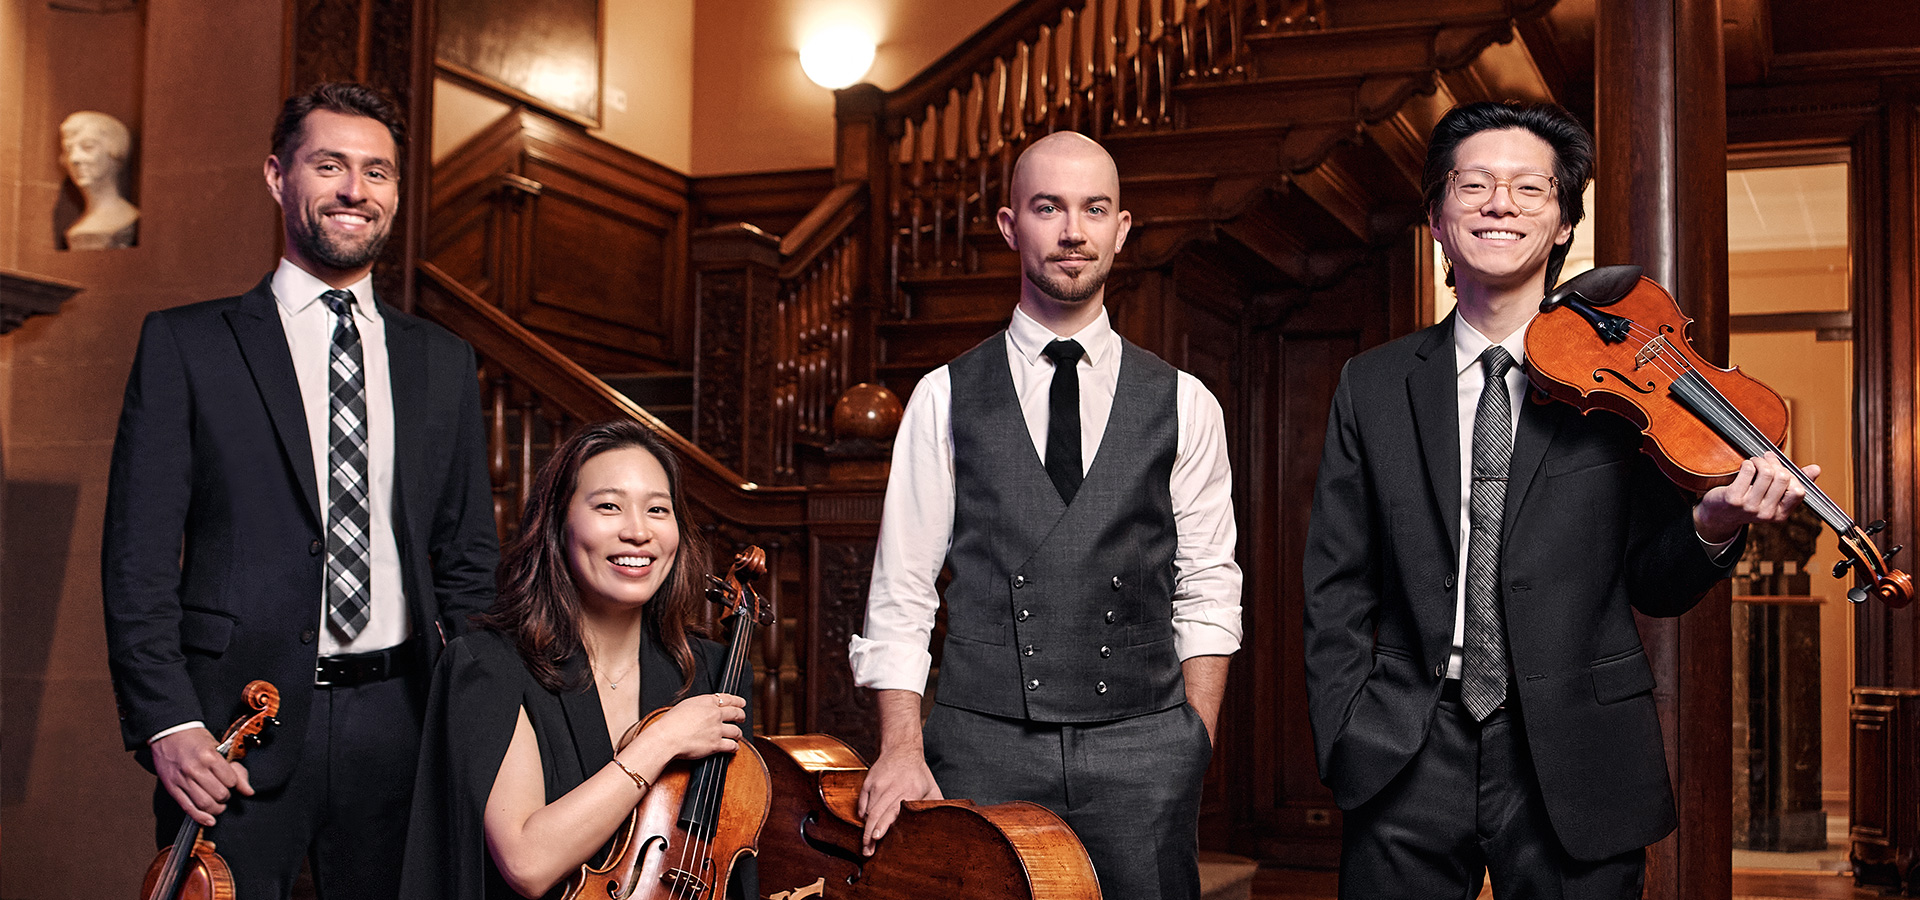 The Dover Quartet, three men and one woman, pose with their instruments in an elegant interior.